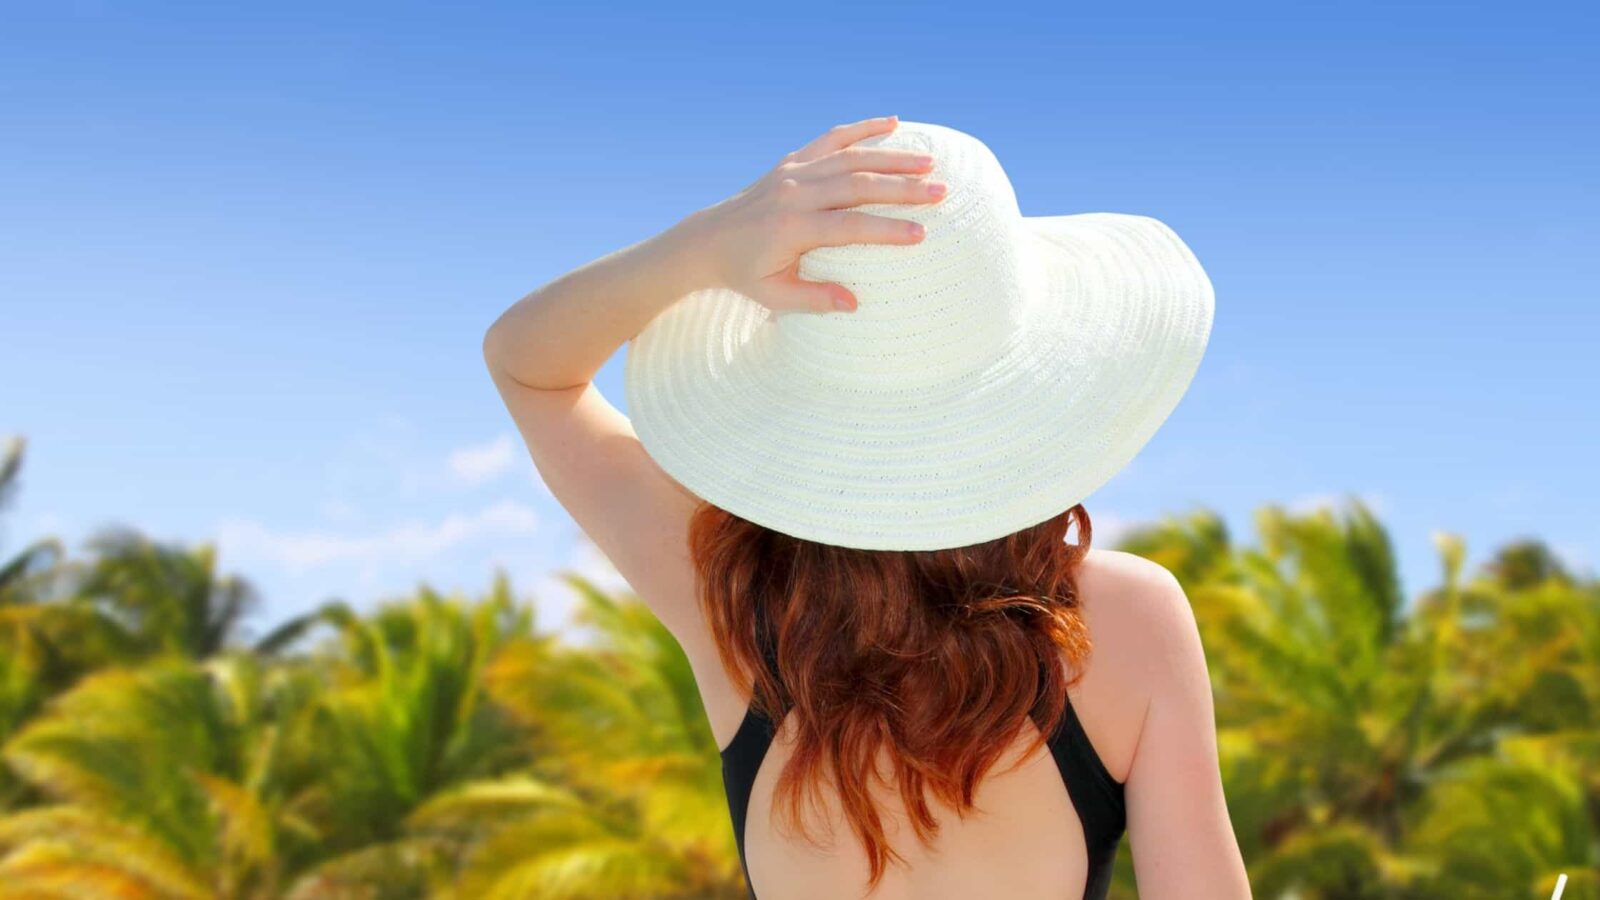 4 [More] Essentials For The Perfect Redhead Beach Day